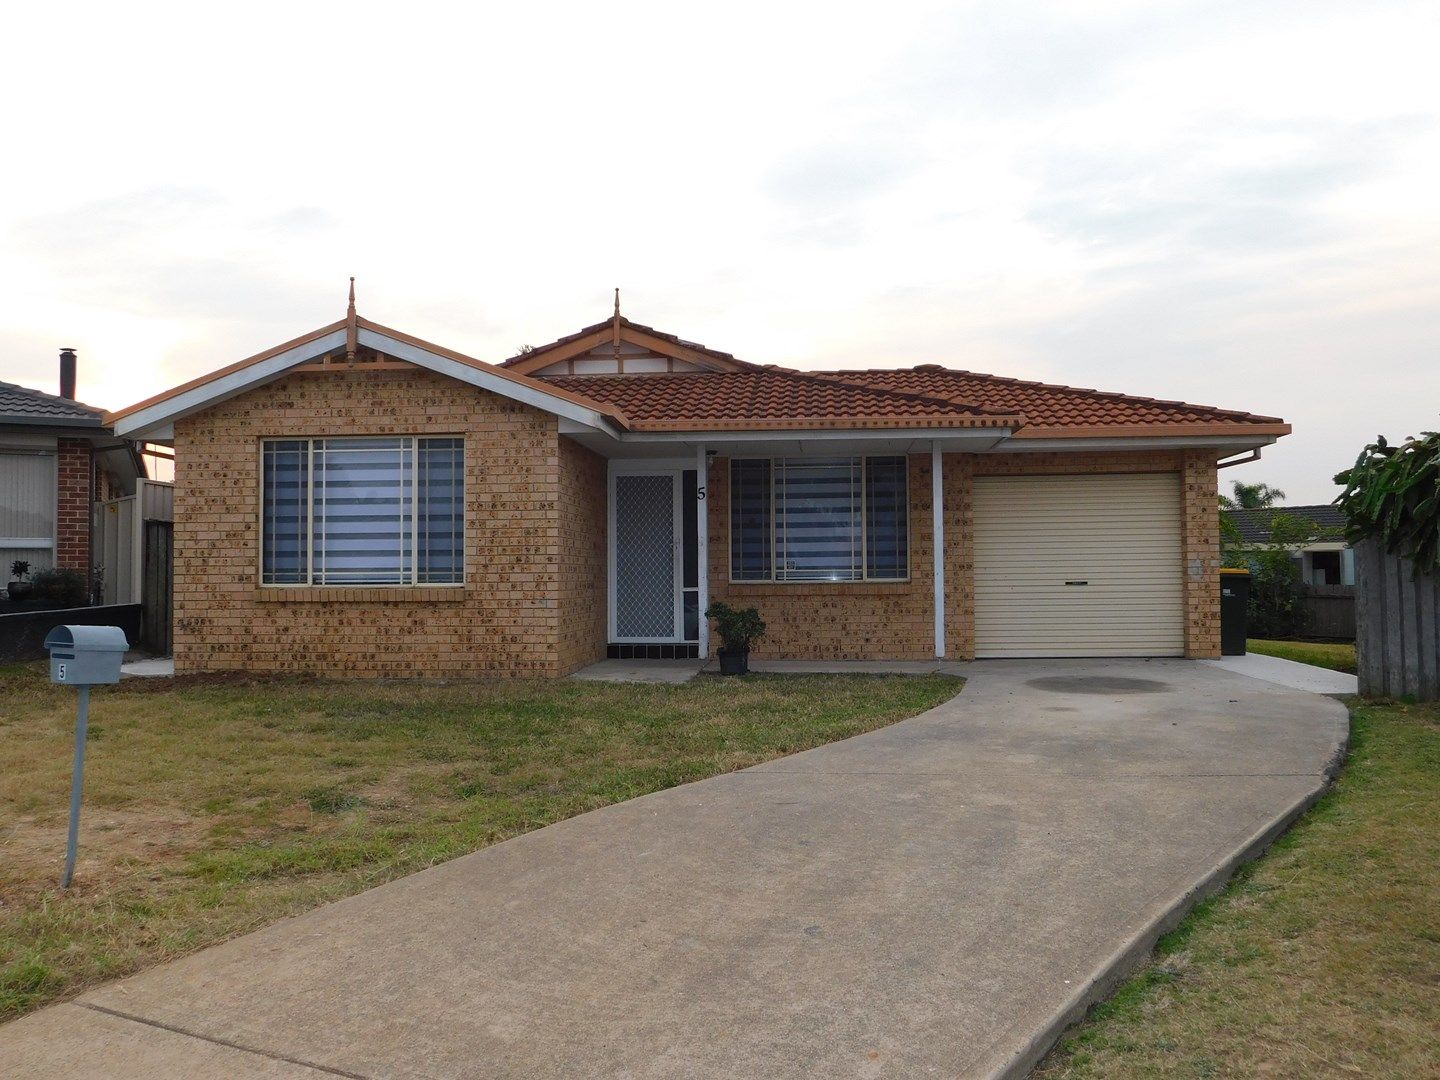 3 bedrooms House in 5 Cygnet Avenue GREEN VALLEY NSW, 2168